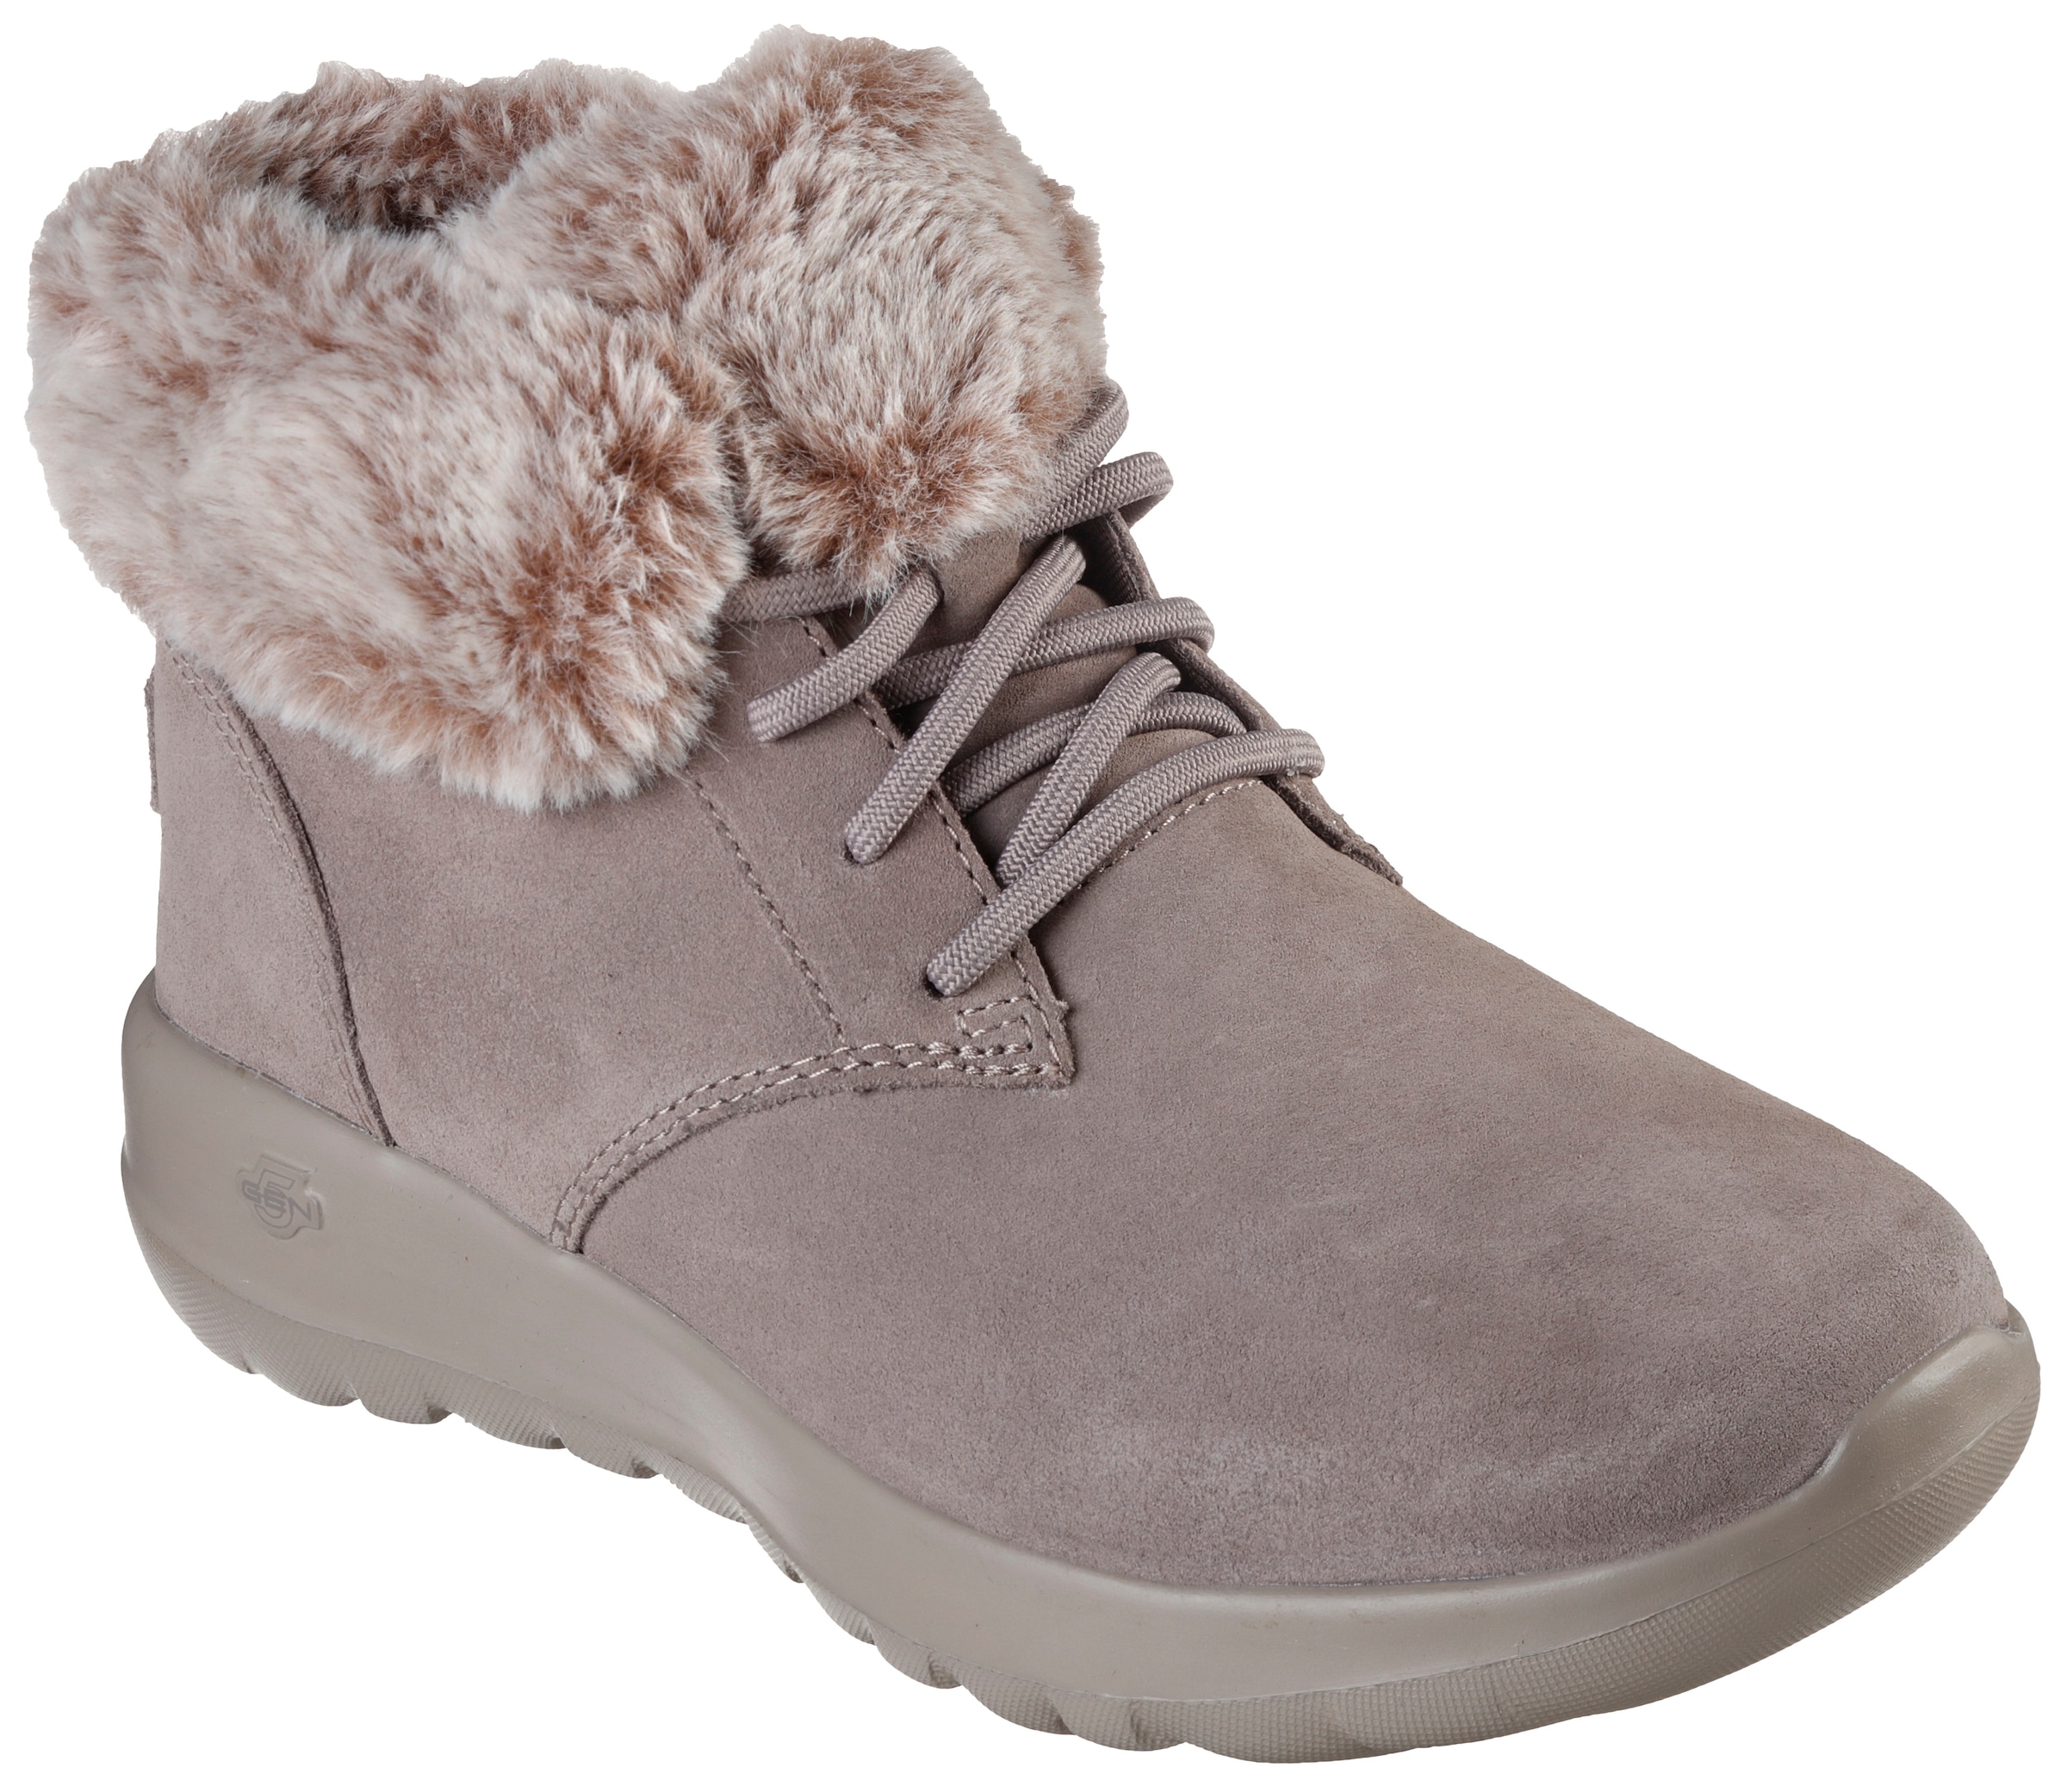 Winterboots »ON-THE-GO JOY - PLUSH DREAMS«, in bequemer Form